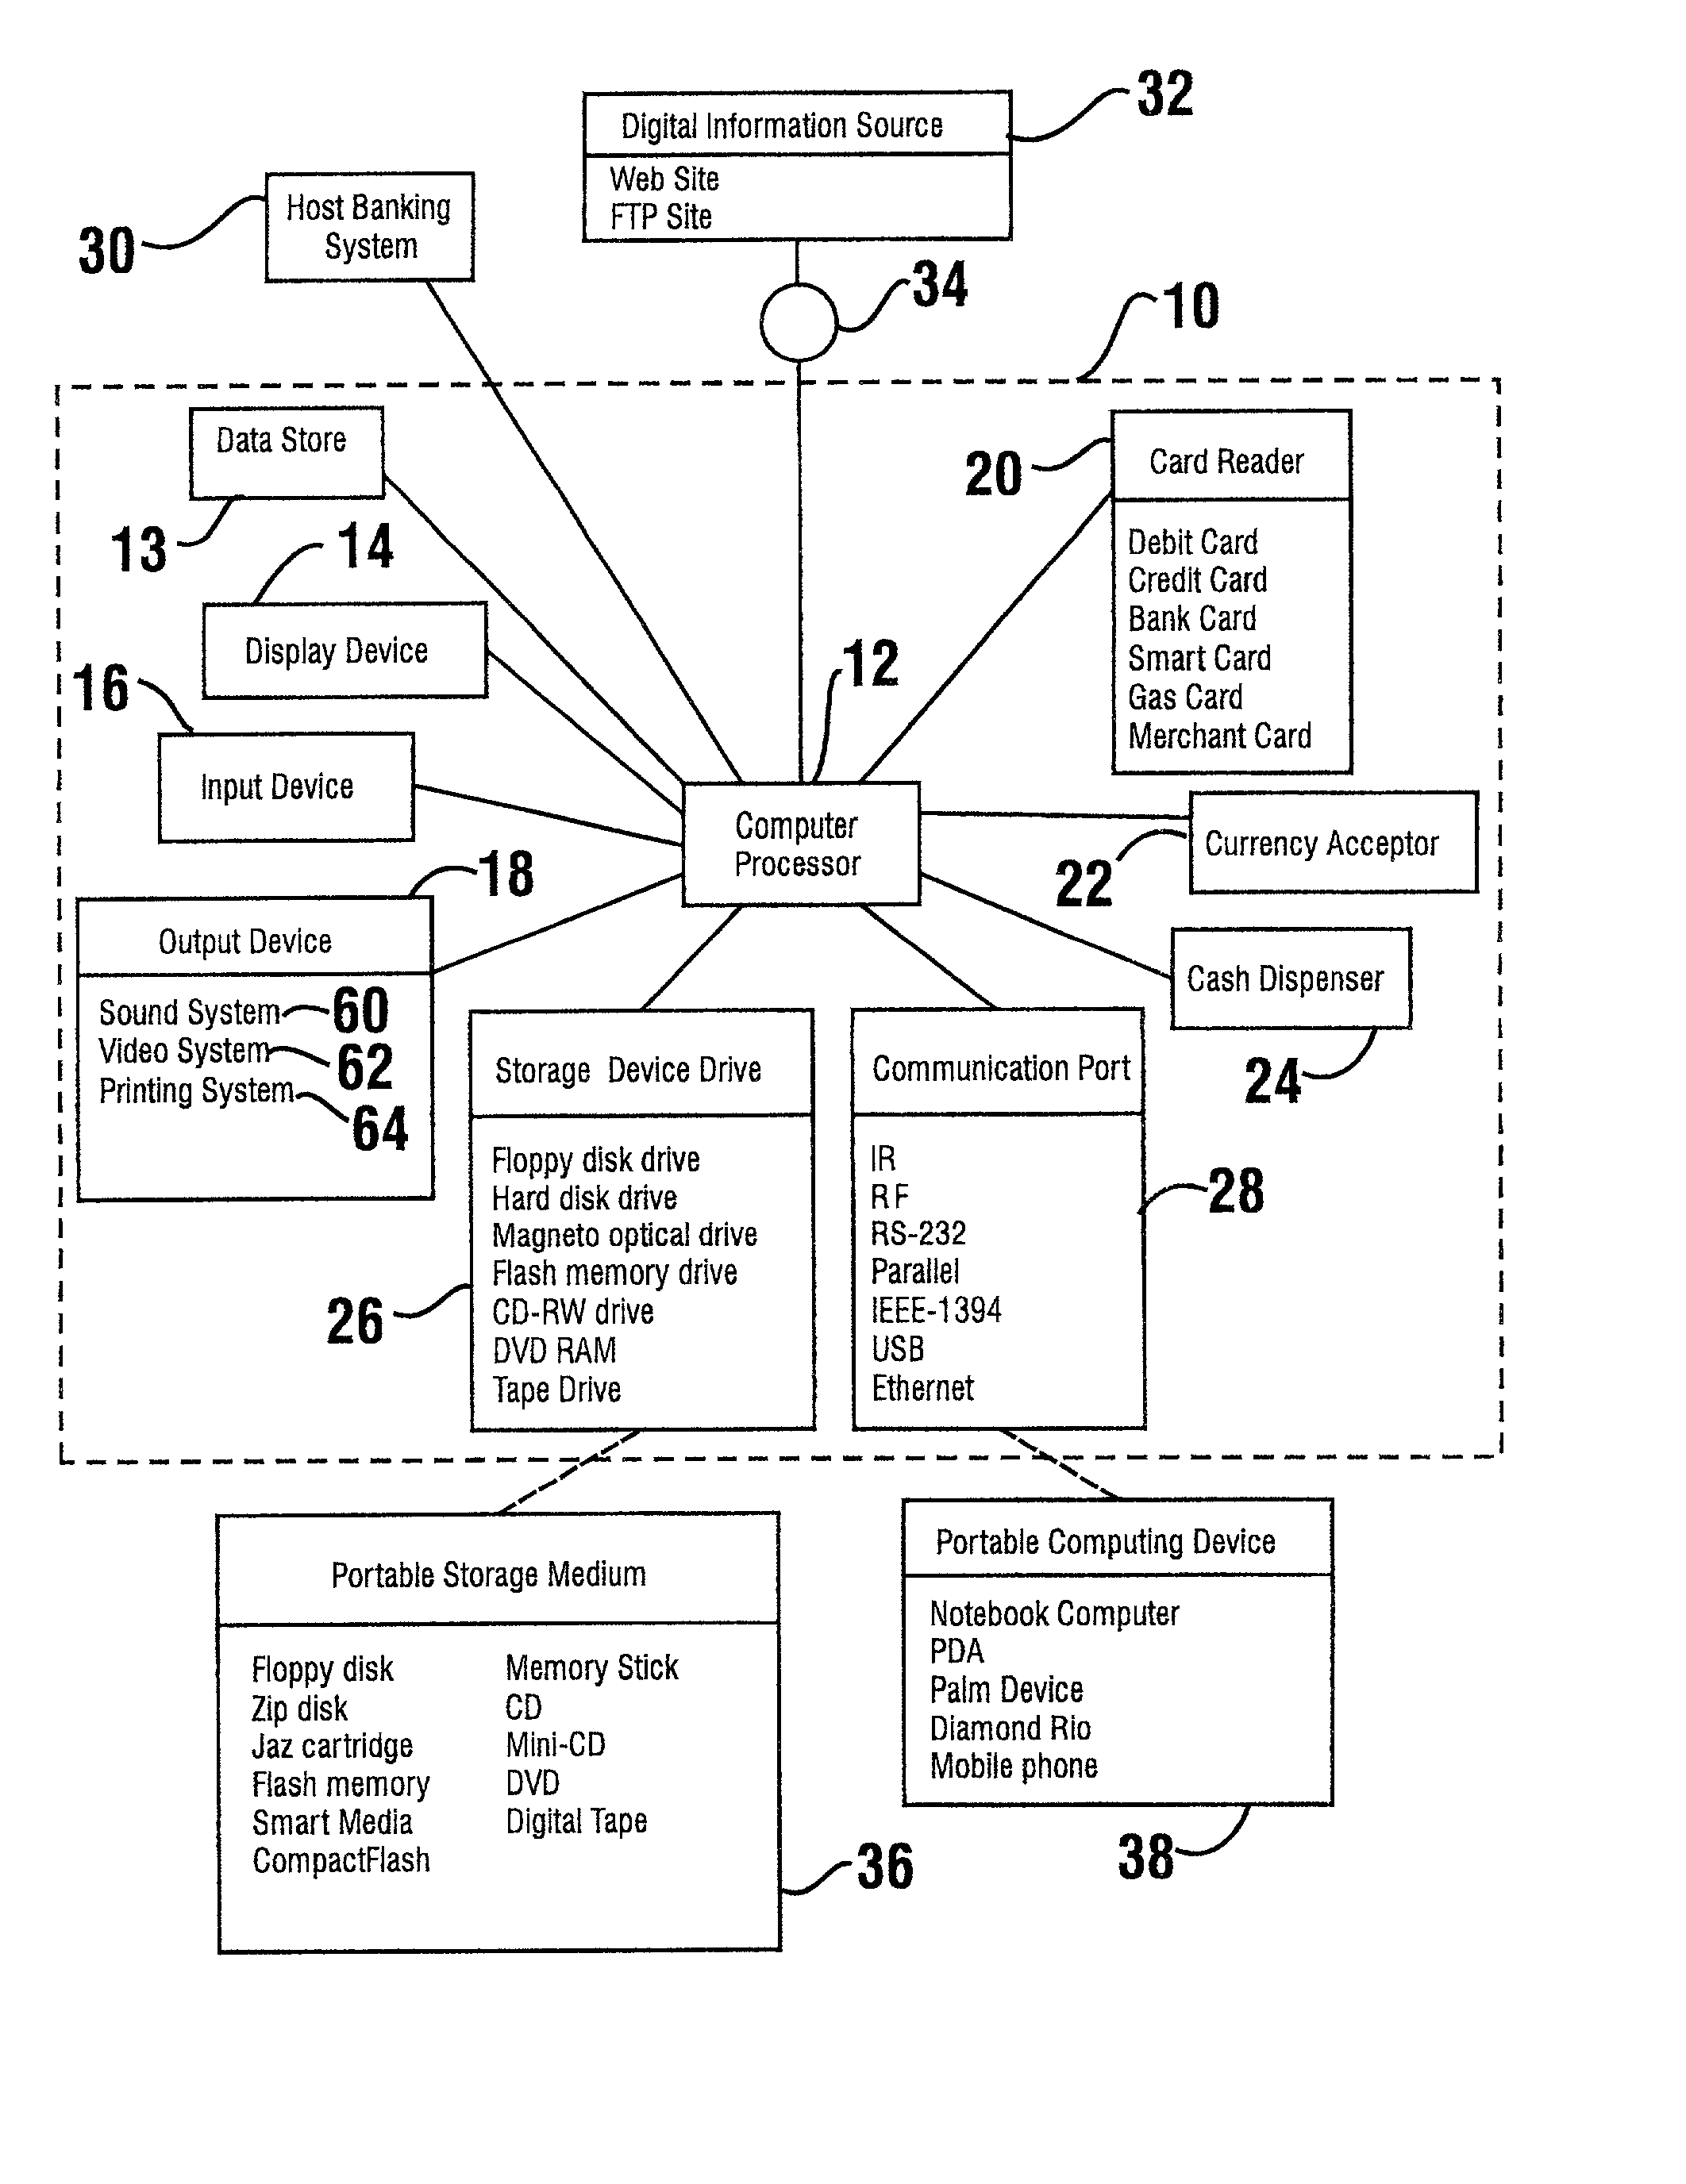 System and method for dispensing digital information from an automated transaction machine